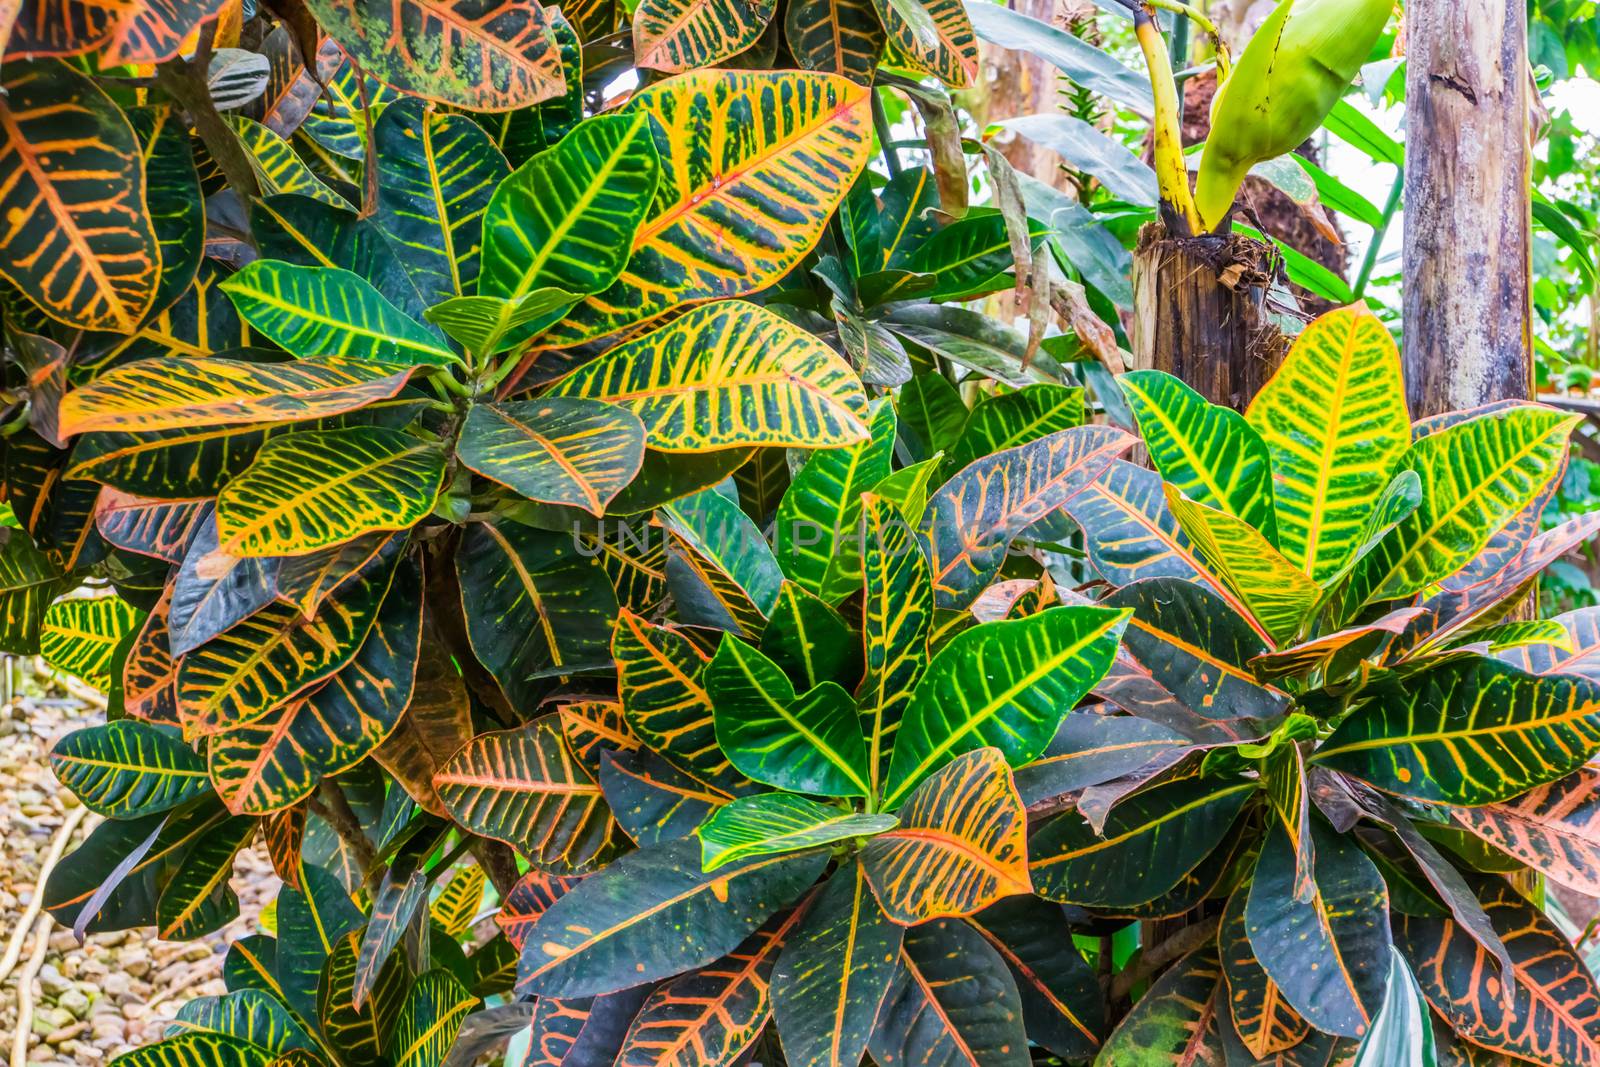 pattern of colorful leaves of a dumb cane plant, popular tropical cultivated specie from America